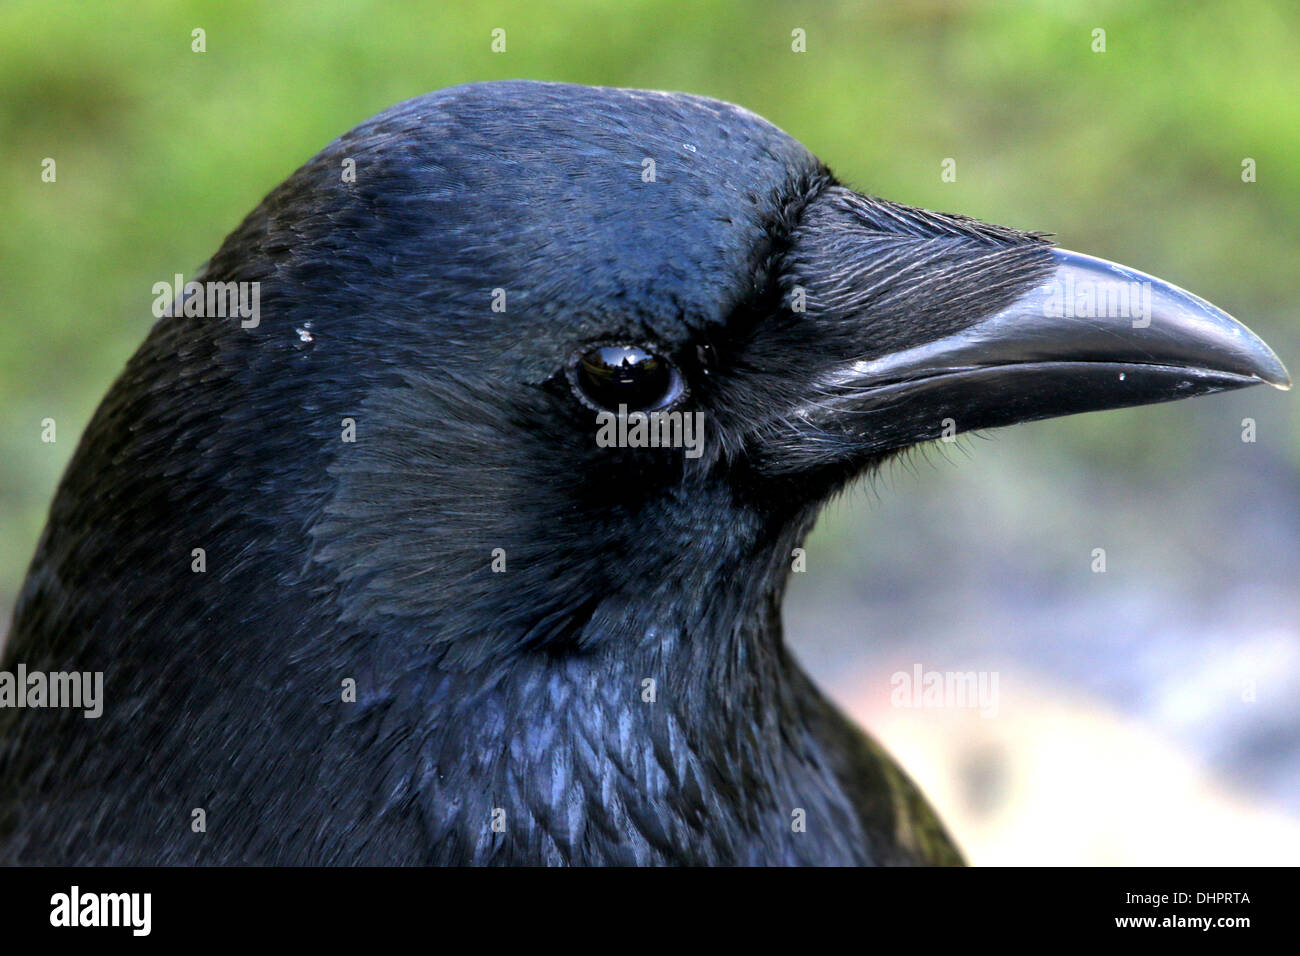 Head  of a black carrion crow (Corvus Corone) close up Stock Photo